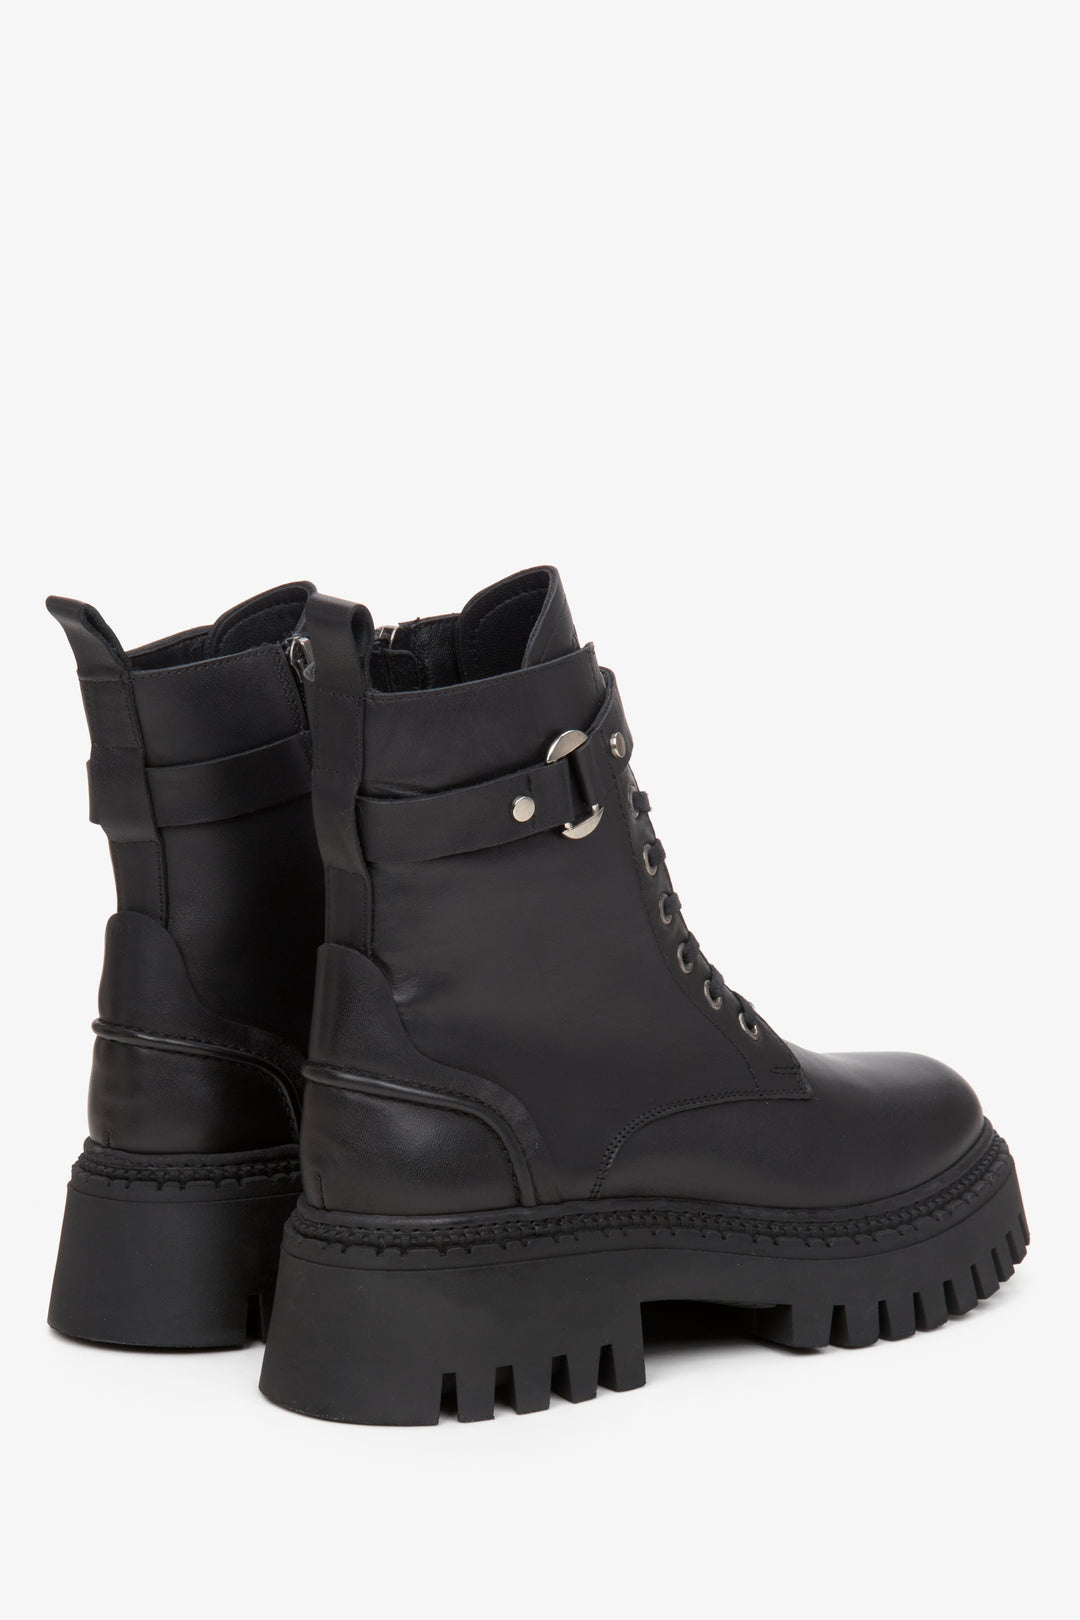 Women's black ankle boots made of genuine leather  - close-up on the heel of the shoe.